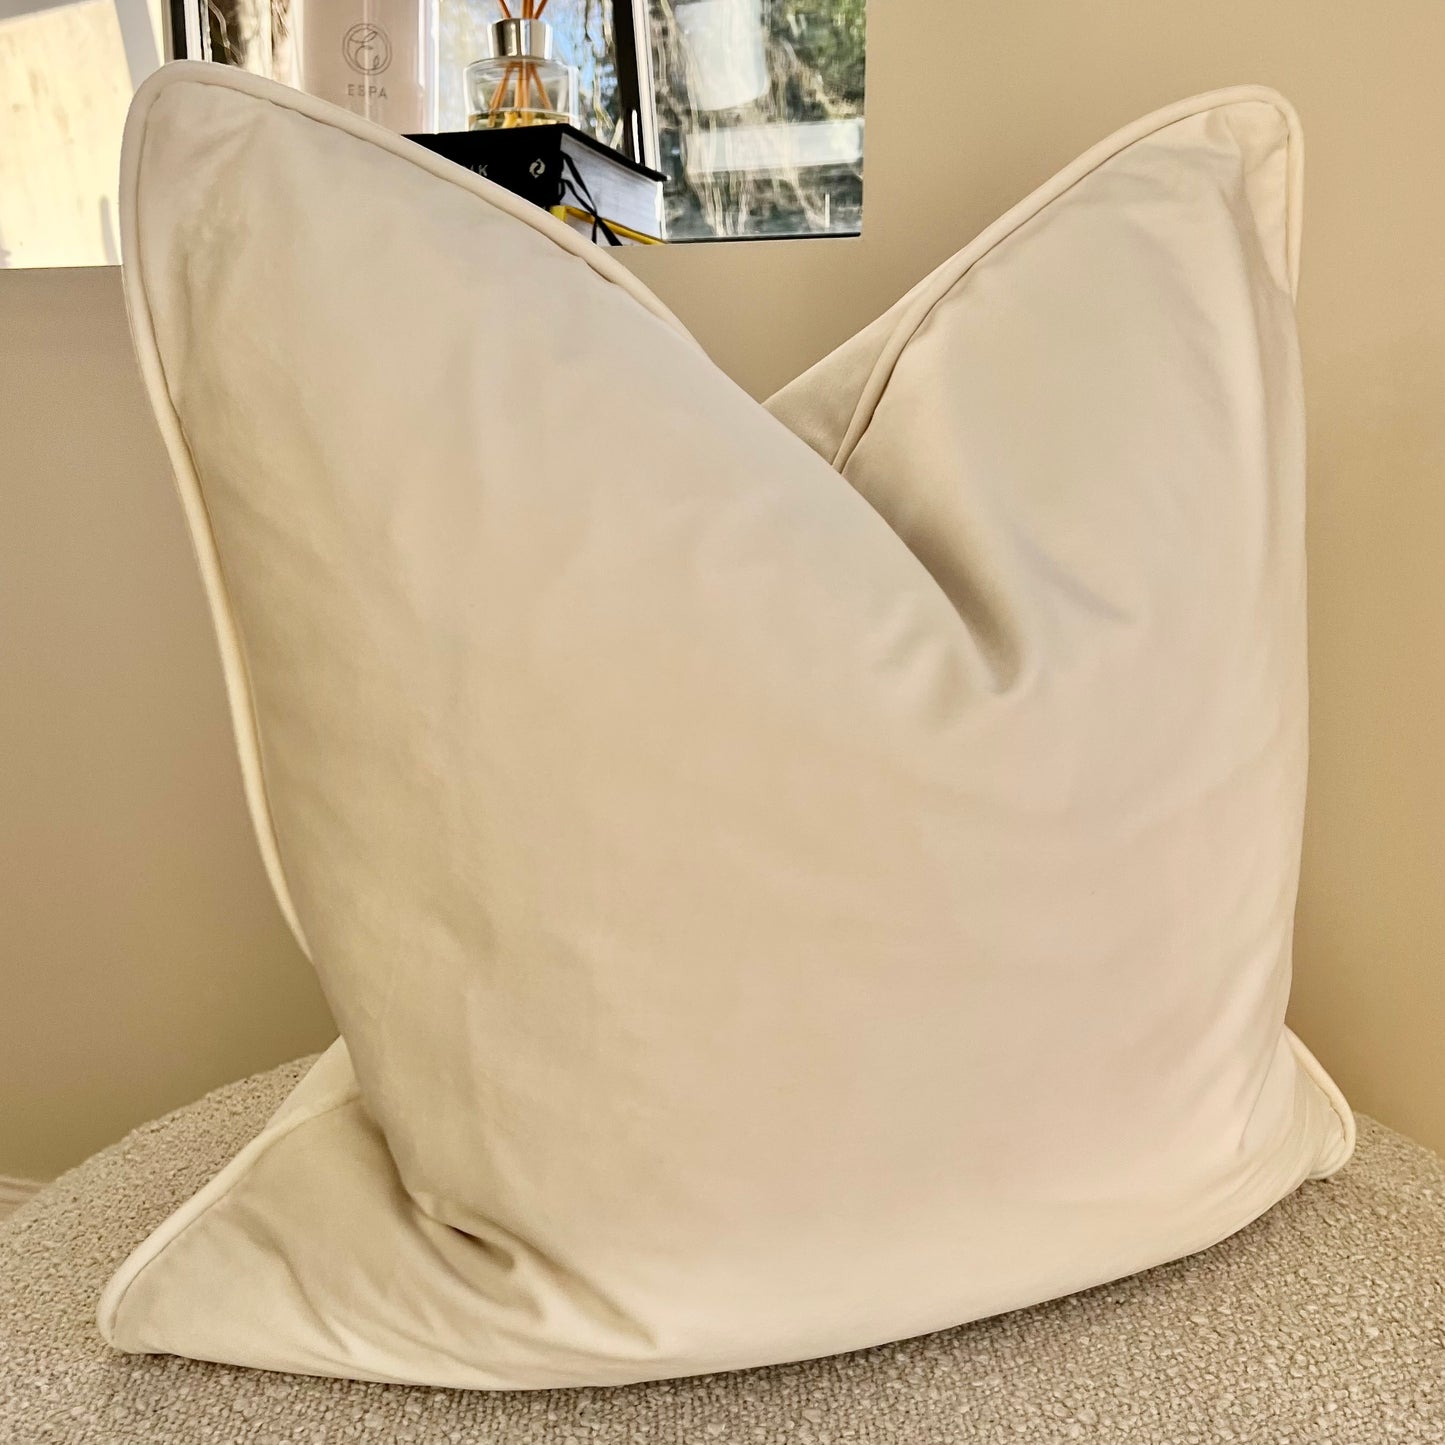 Velvet Cream Cushion with Piping - PRE ORDER